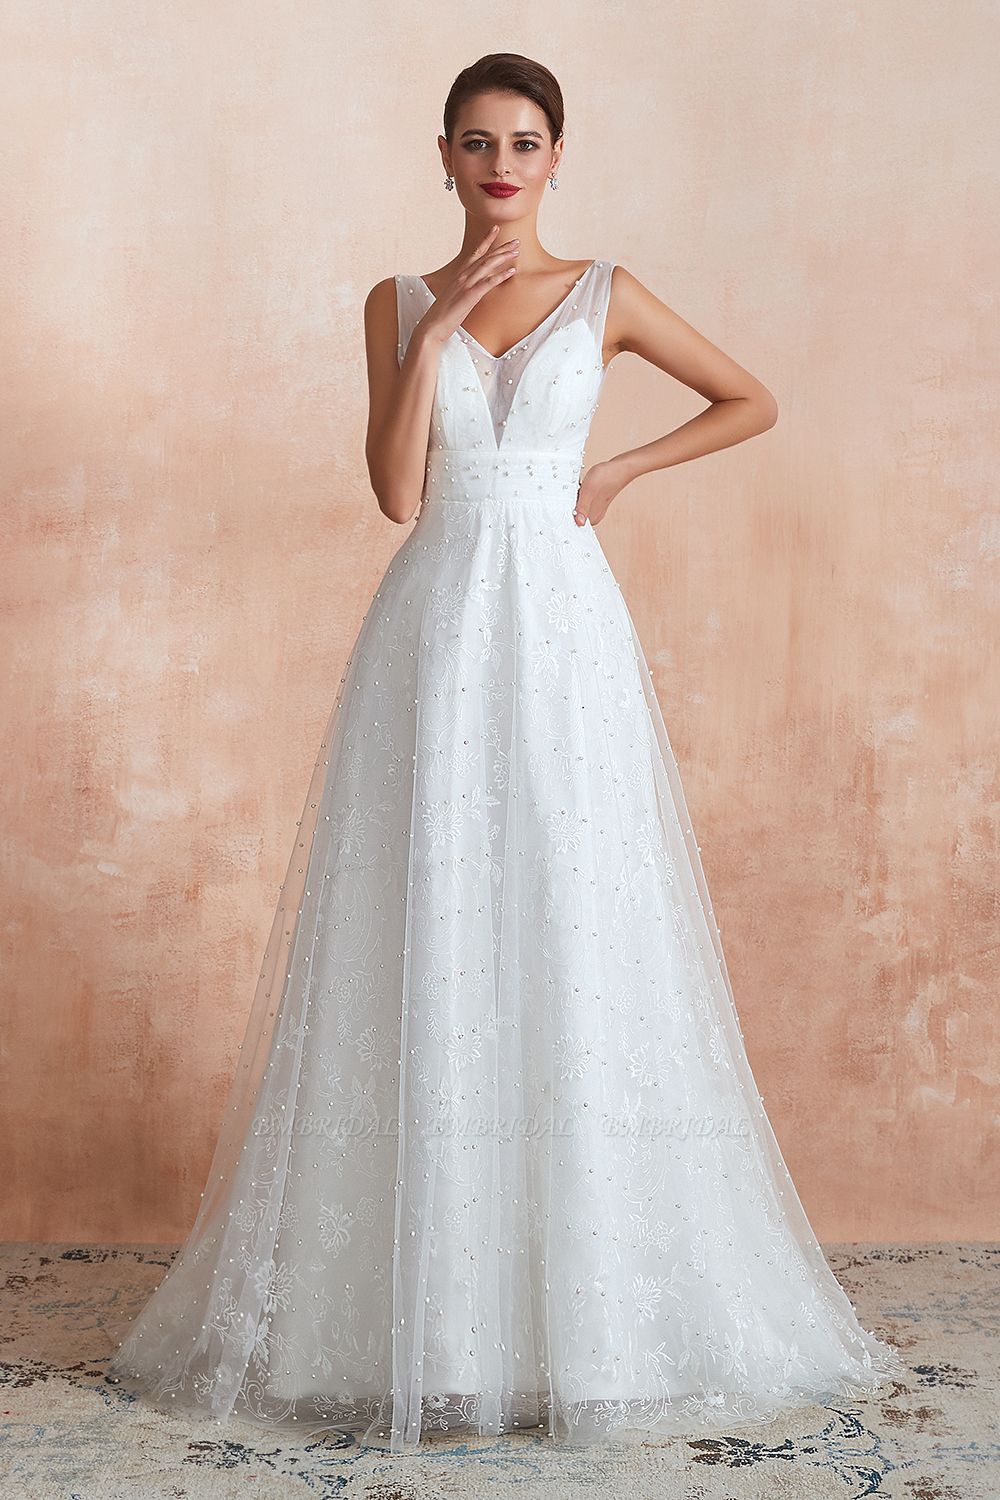 BMbridal Fantastic V-Neck Sleeveless White Appliques Wedding Dress With Pearls